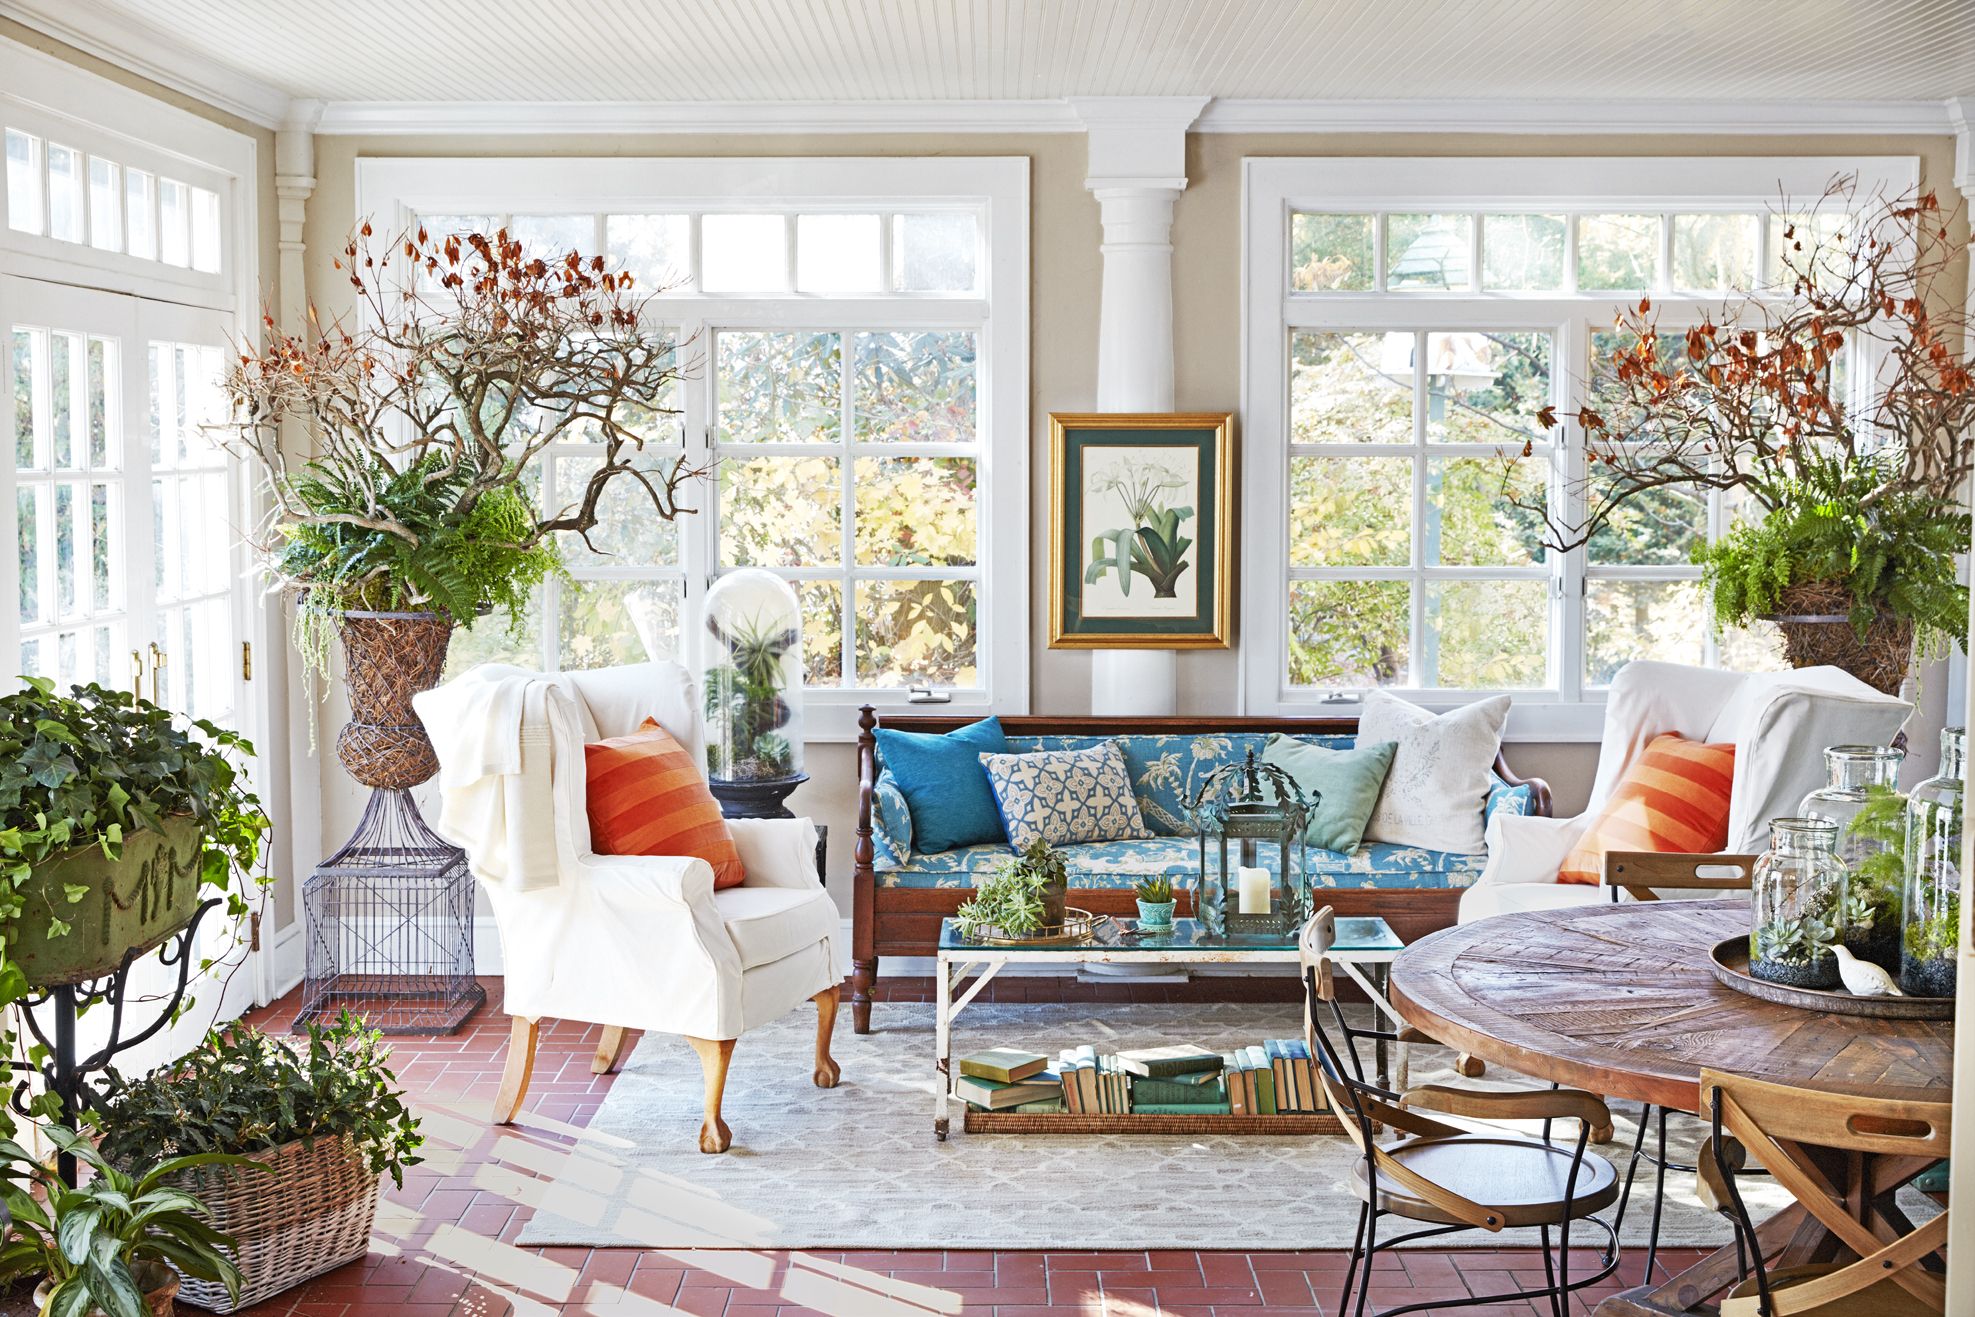 Build the Sunroom of Your Dreams with These 23 Ideas